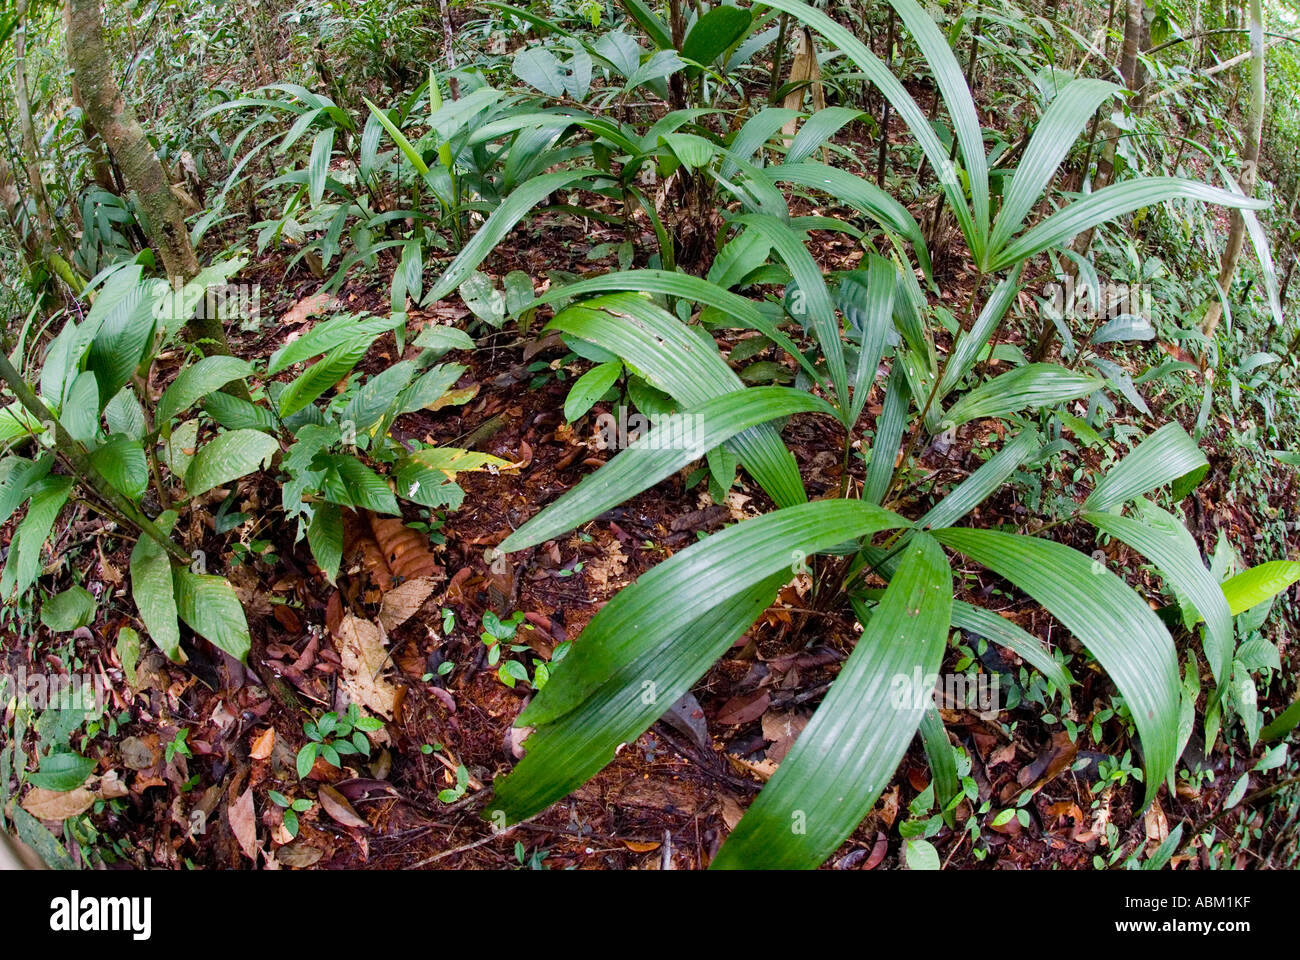 Forest Floor With Irapai Plants Tiera Firme Or High Forest